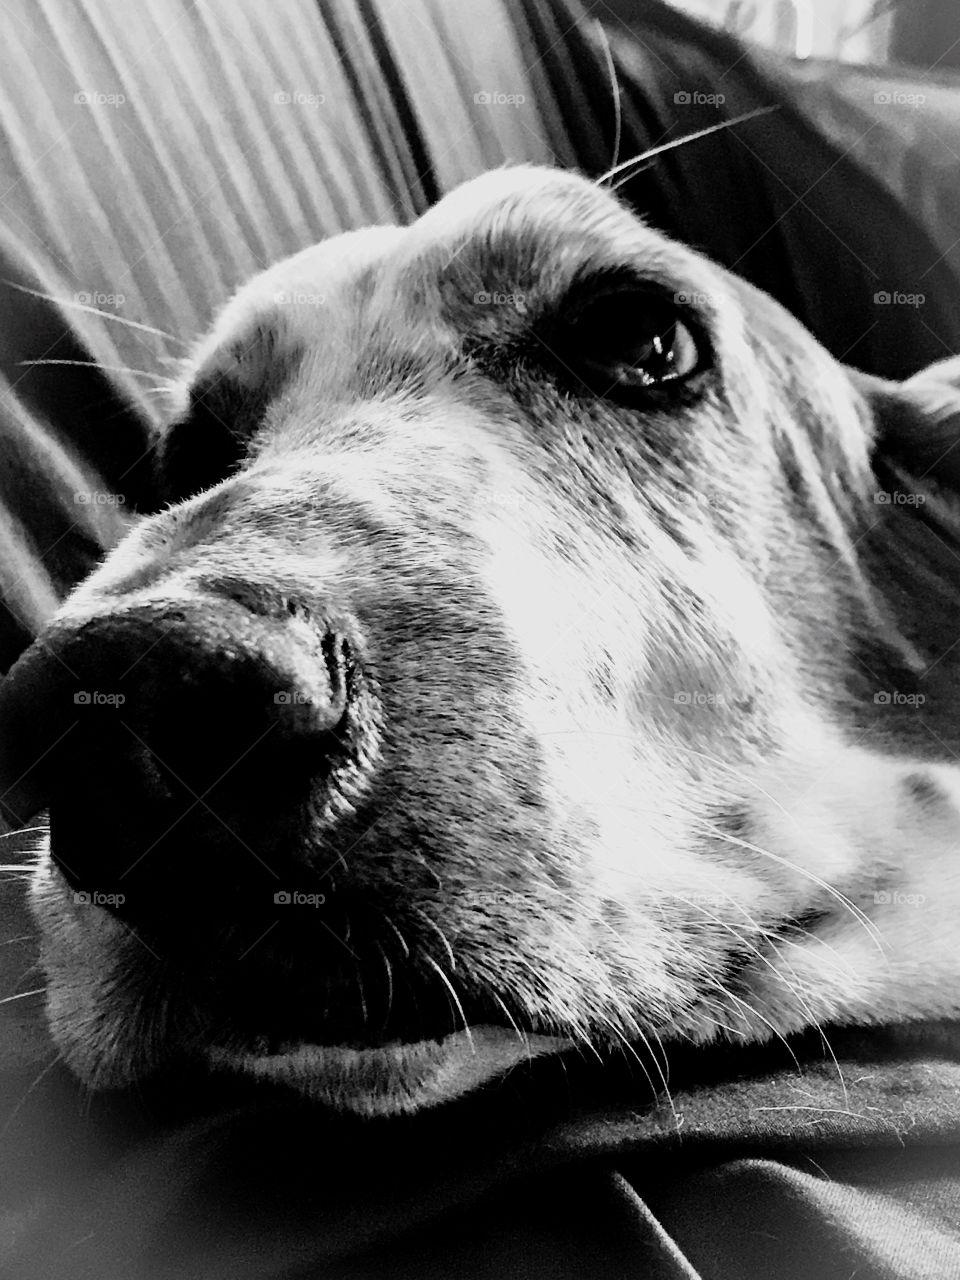 A profile of my hound